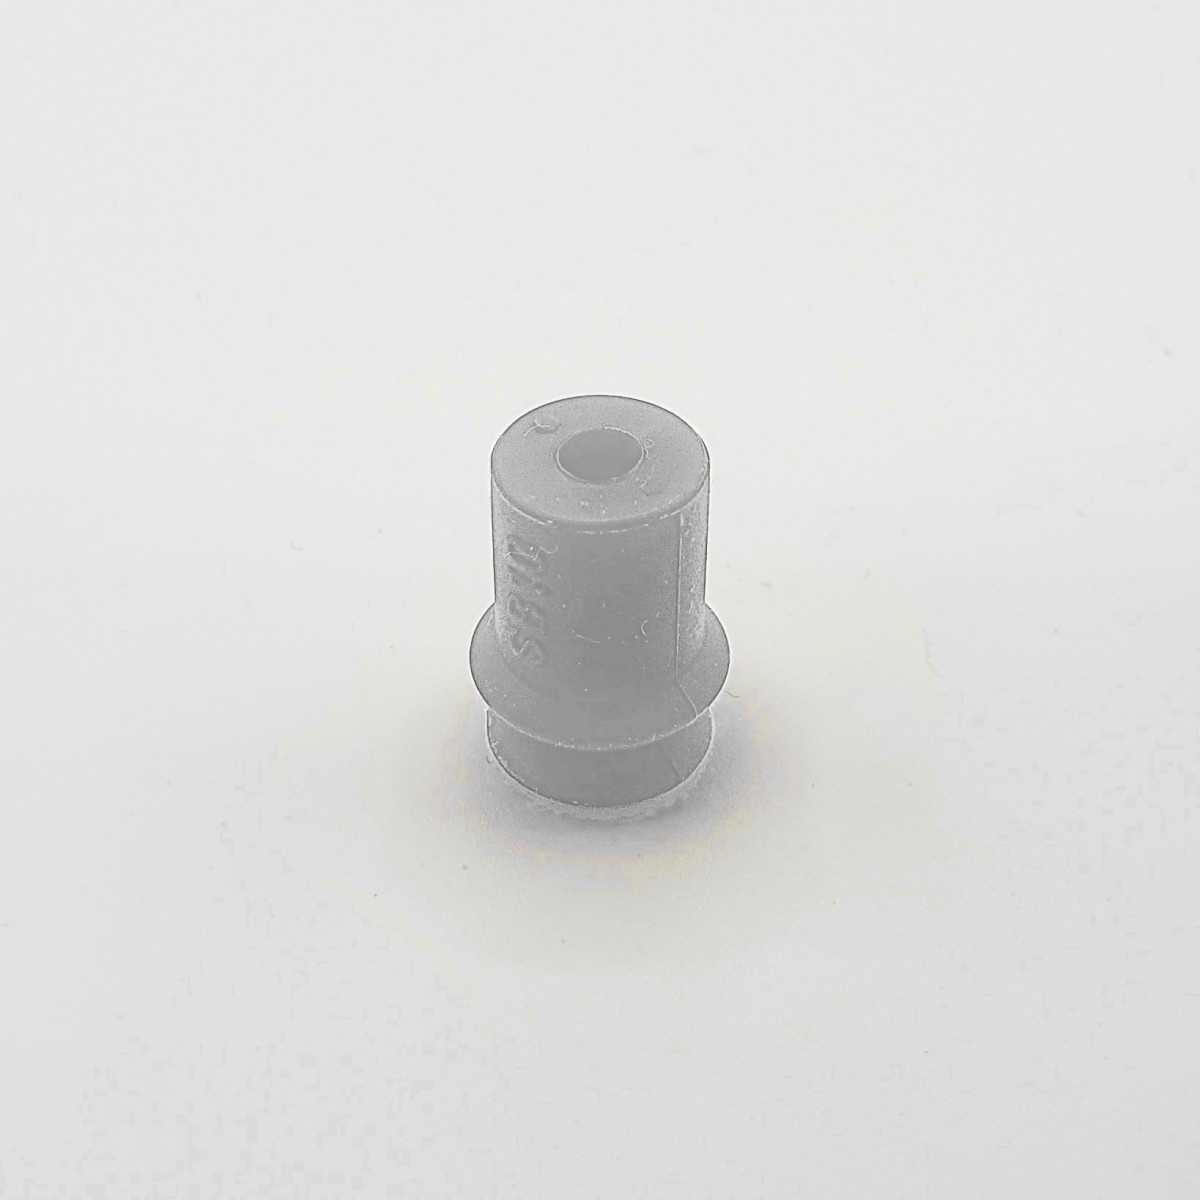 Bellows suction cup D10 / 1,5 / SI white / o.S. | Beta Online Shop